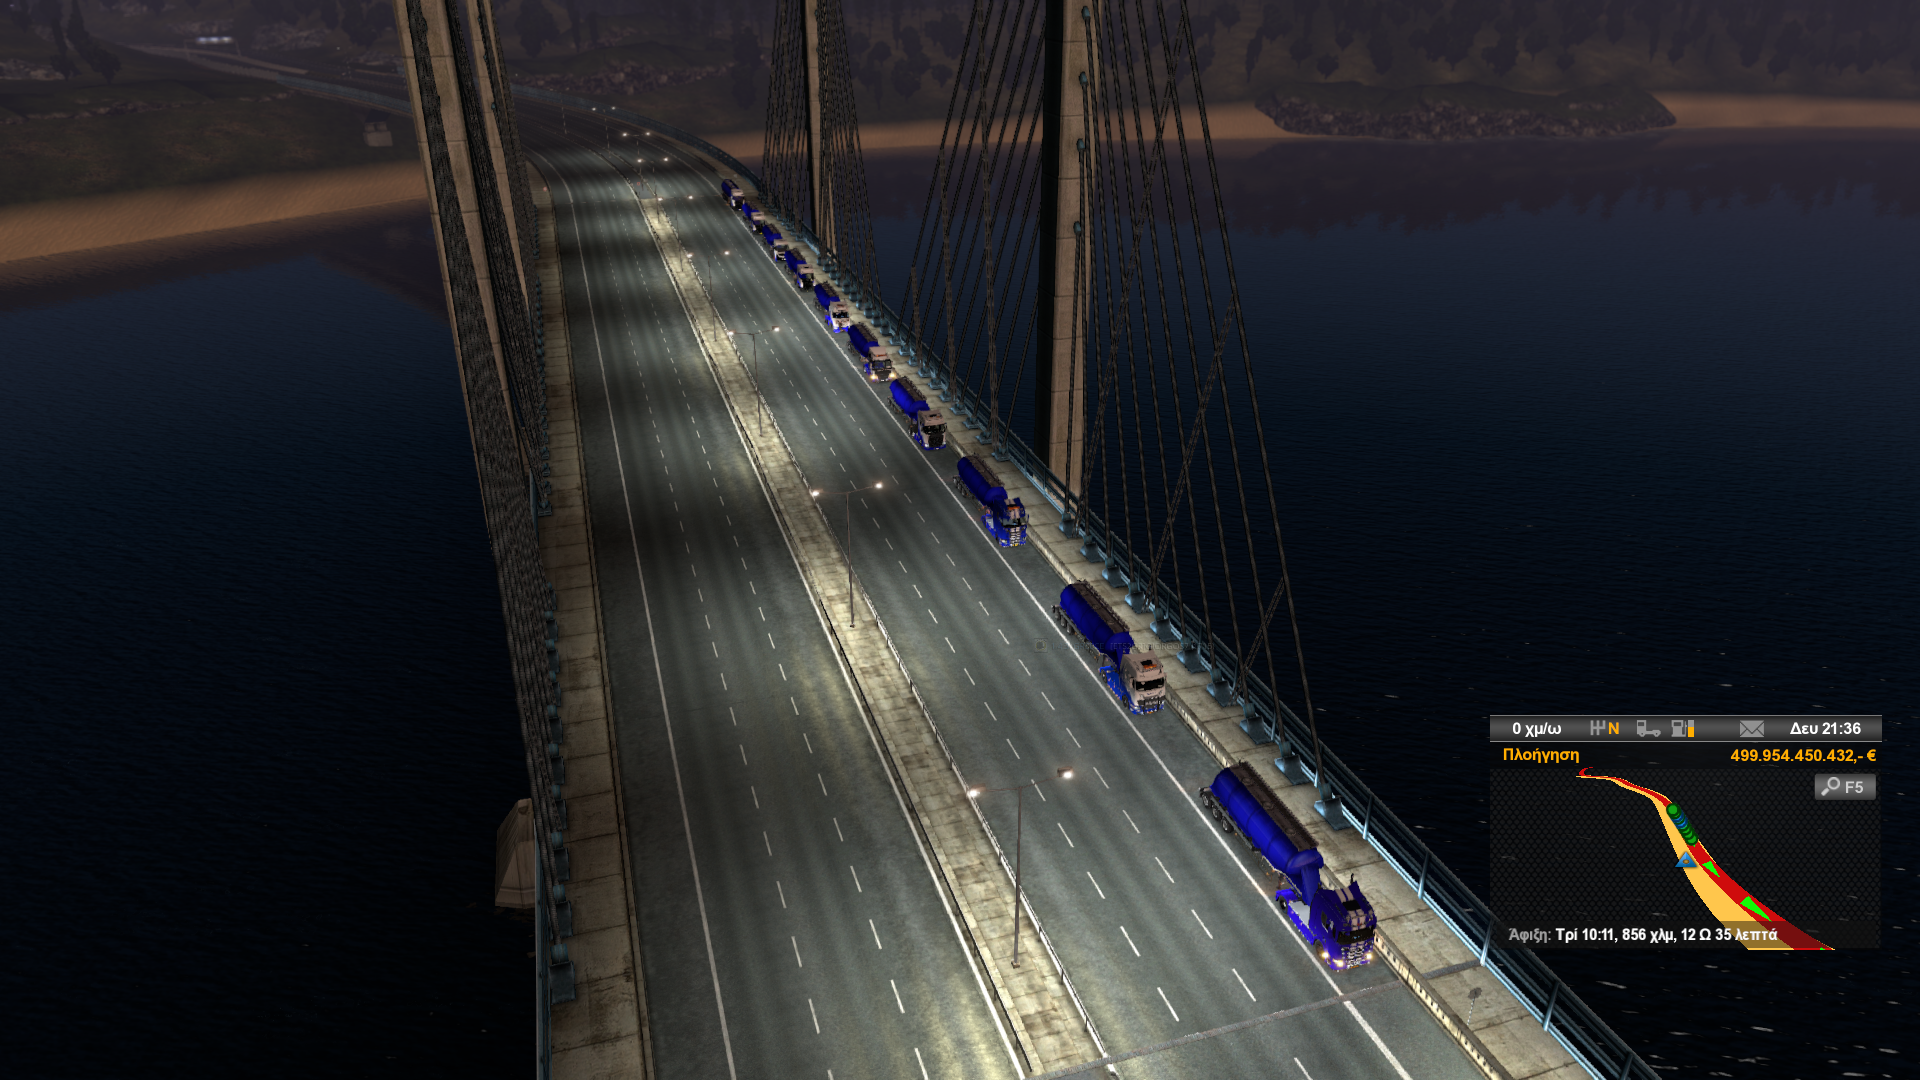 ets2_20191011_221810_00.png